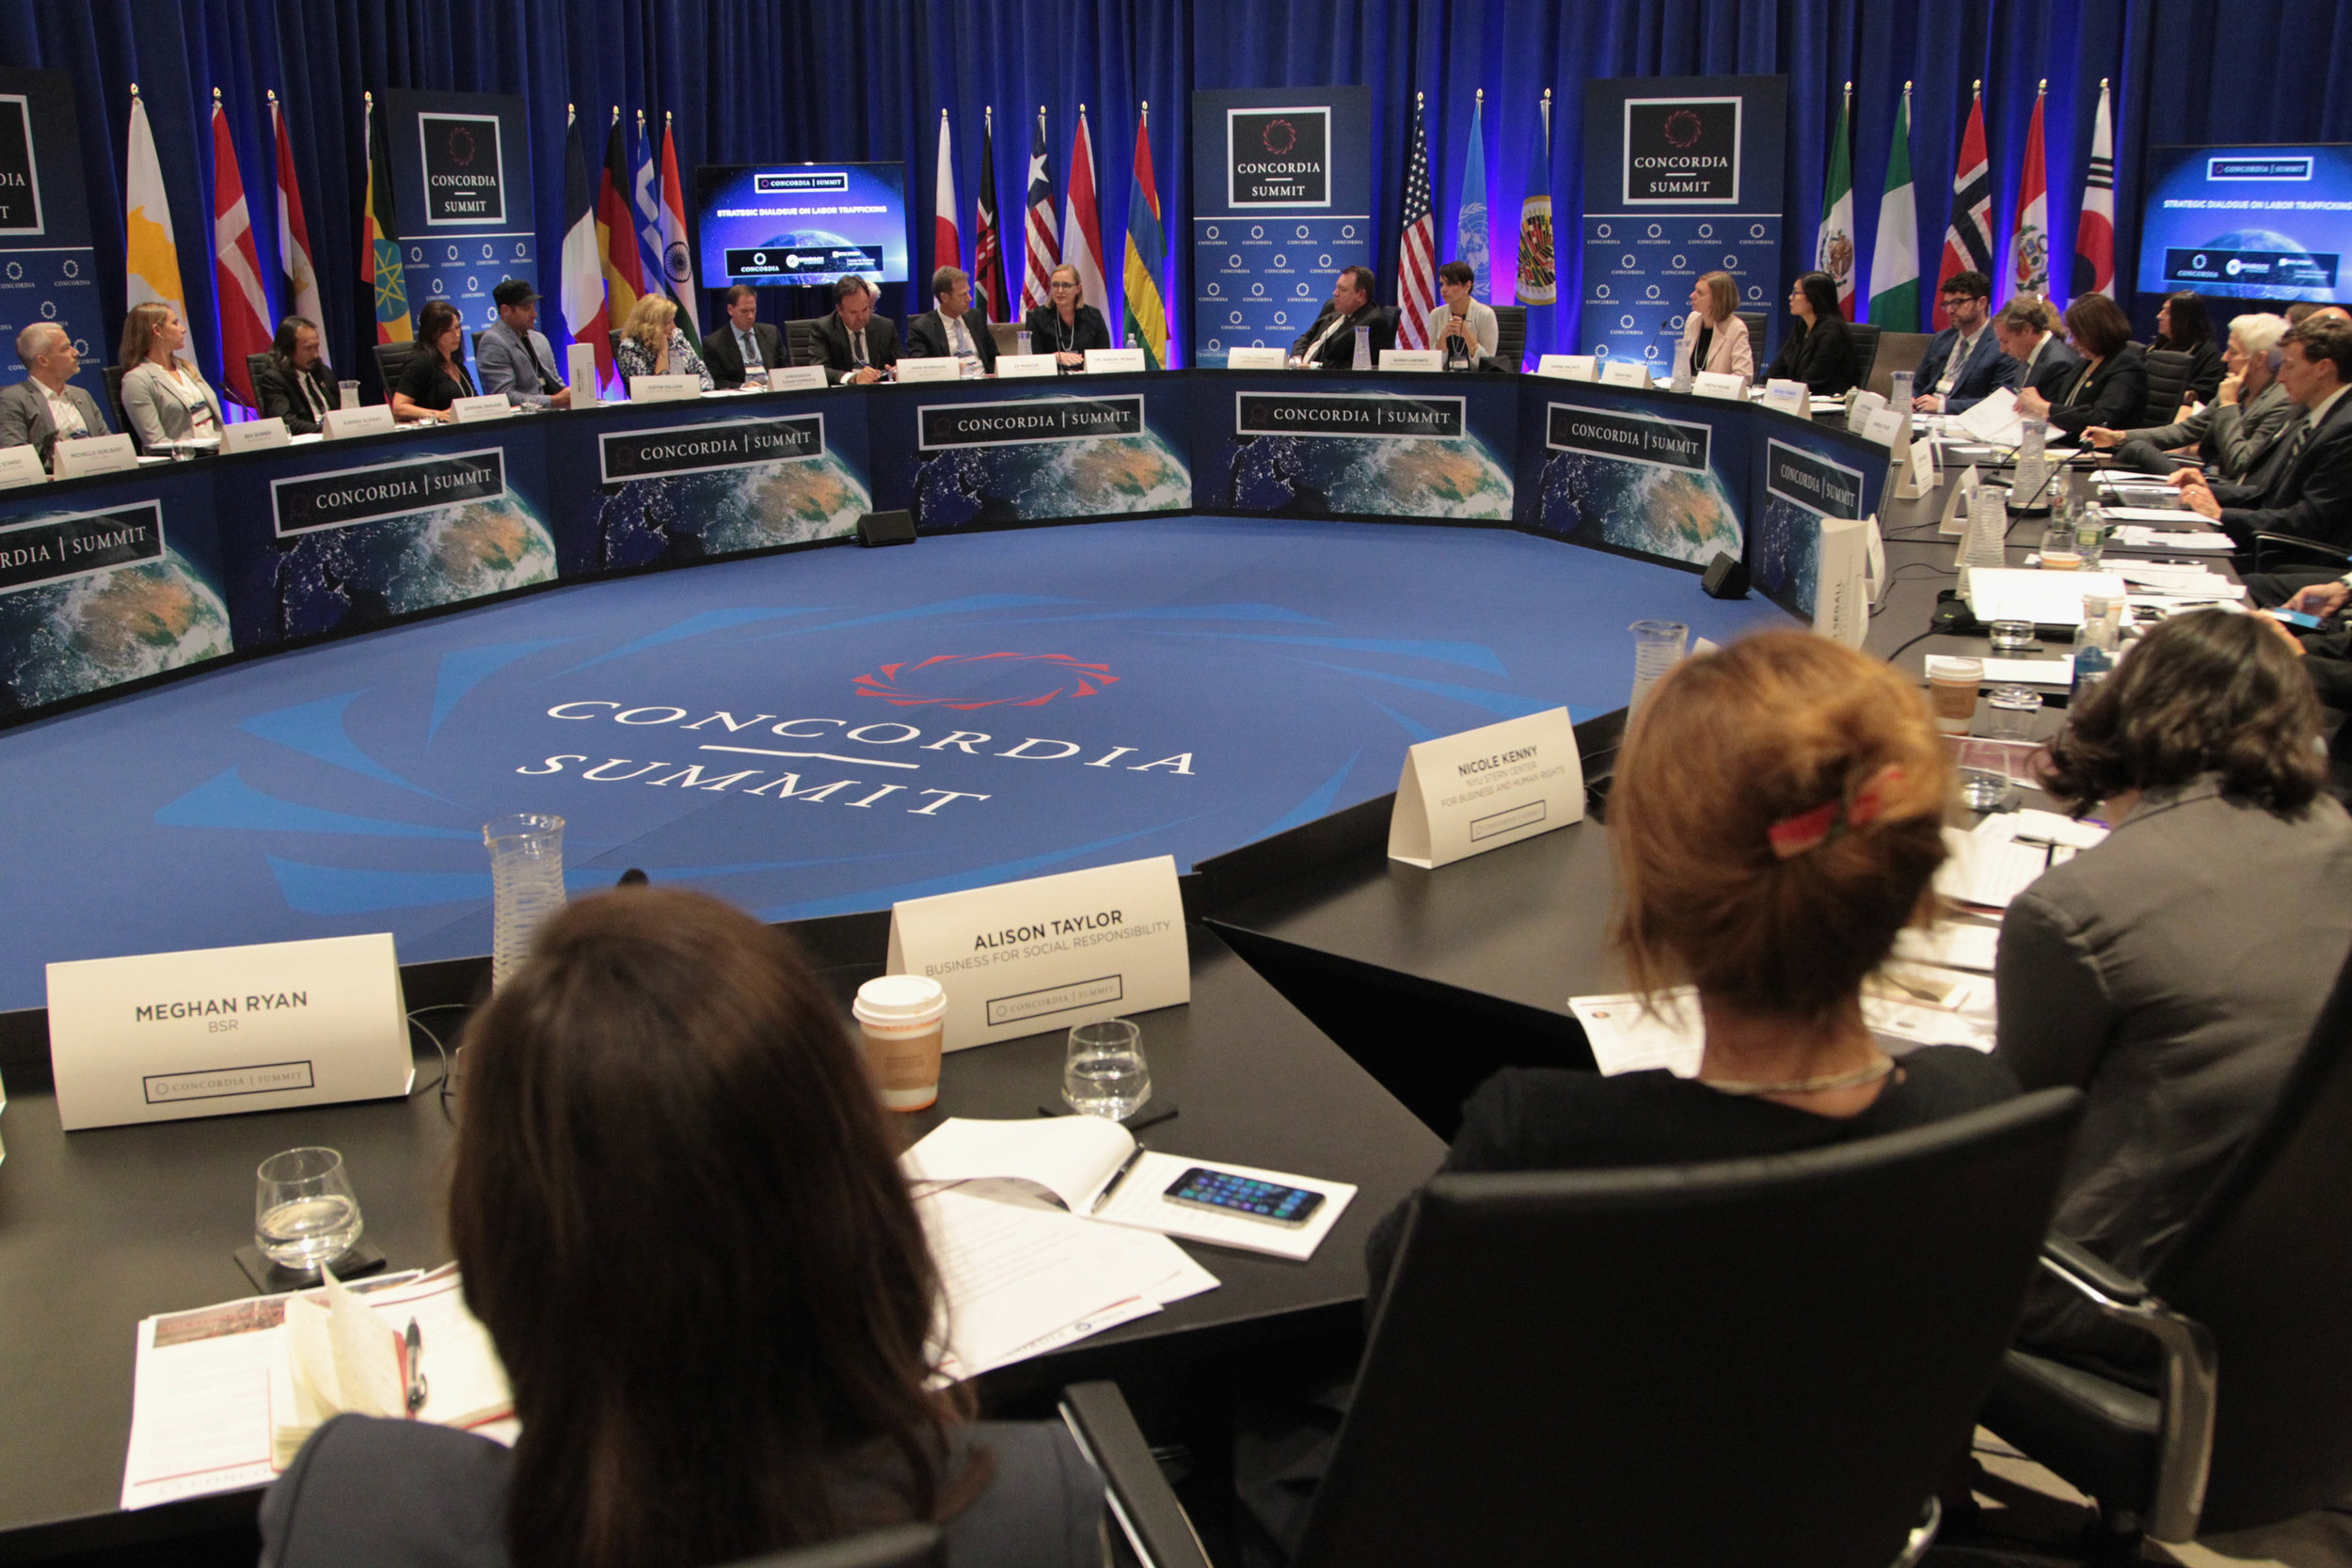 2016 Concordia Summit Convenes World Leaders To Discuss The Power Of Partnerships – Day 1